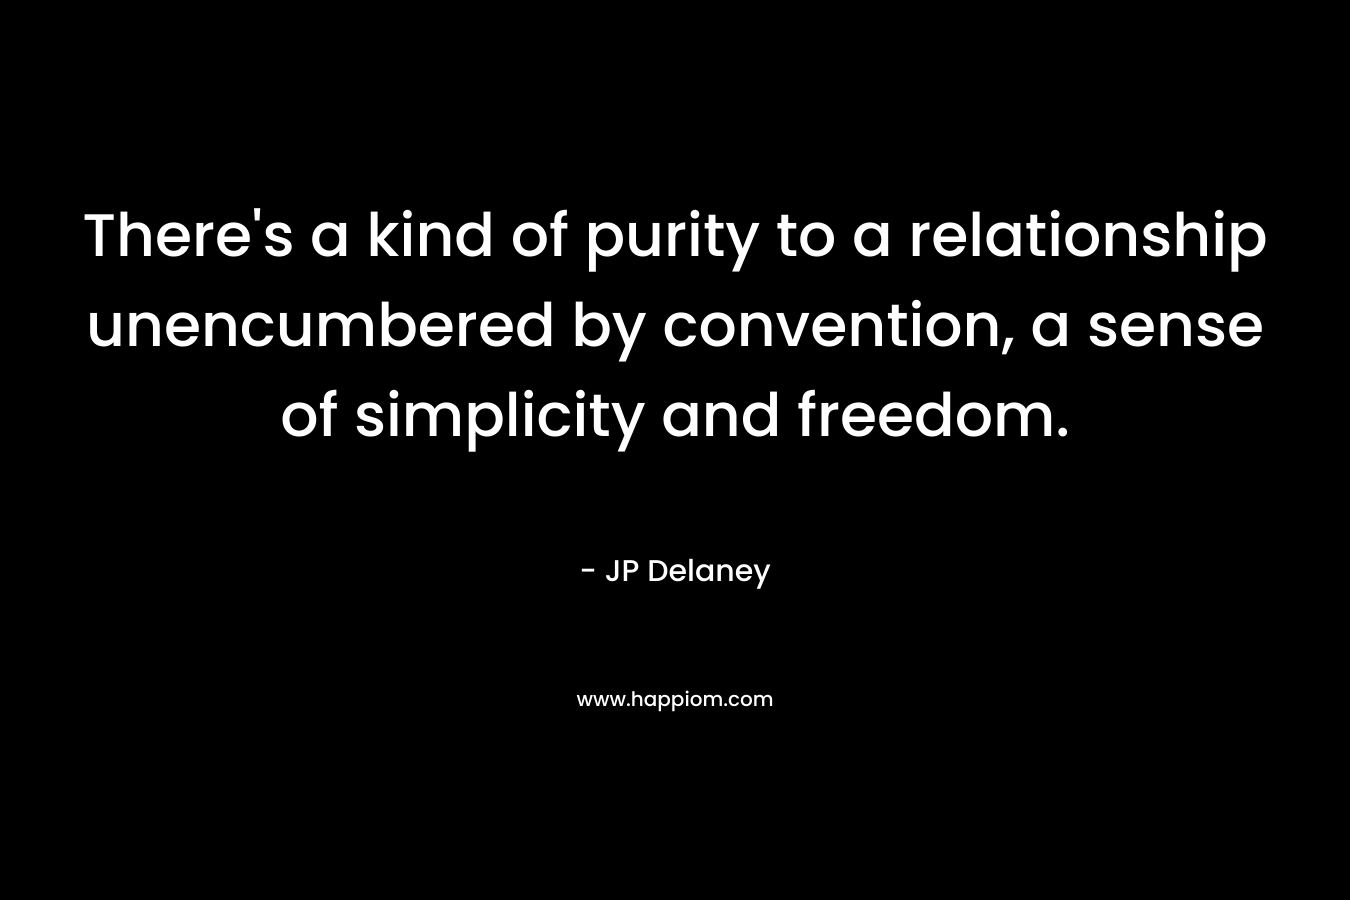 There’s a kind of purity to a relationship unencumbered by convention, a sense of simplicity and freedom. – JP Delaney